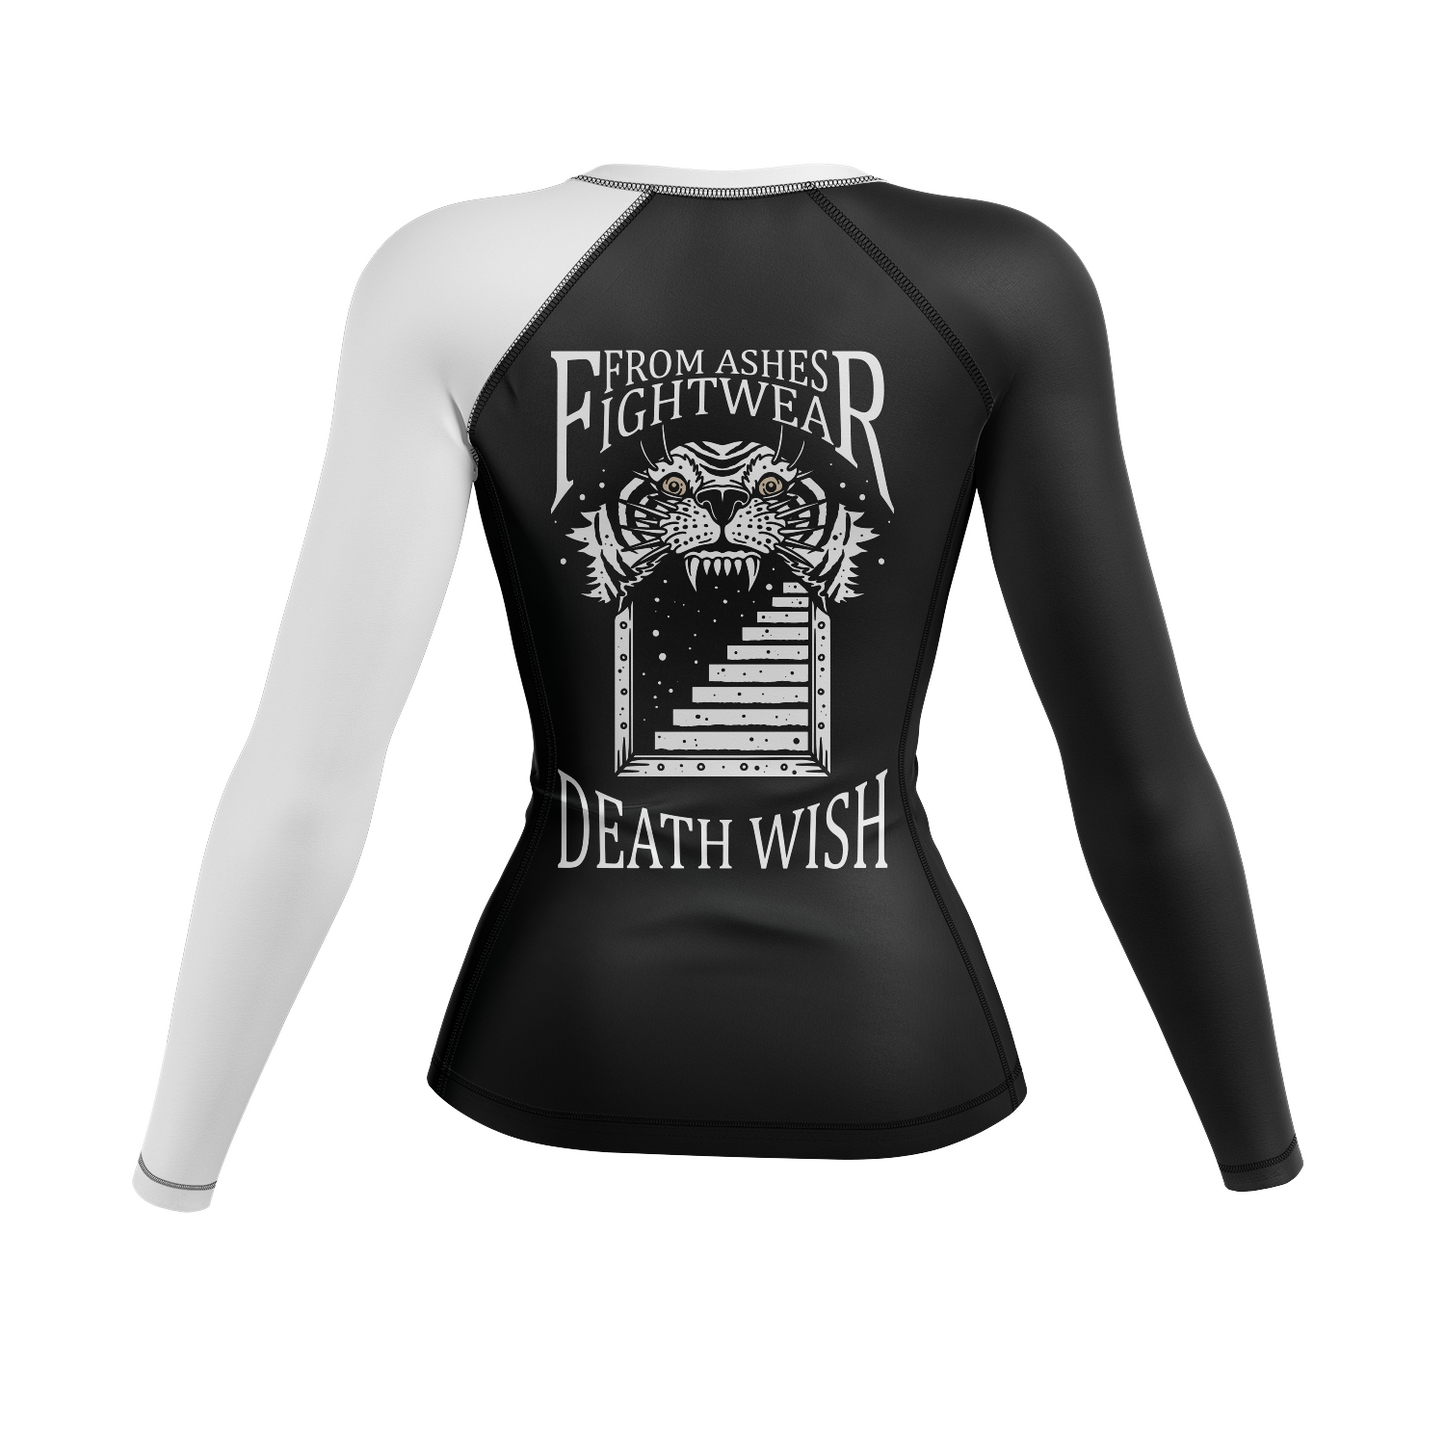 From Ashes Fightwear women's rash guard Death Wish Ranked, black and white